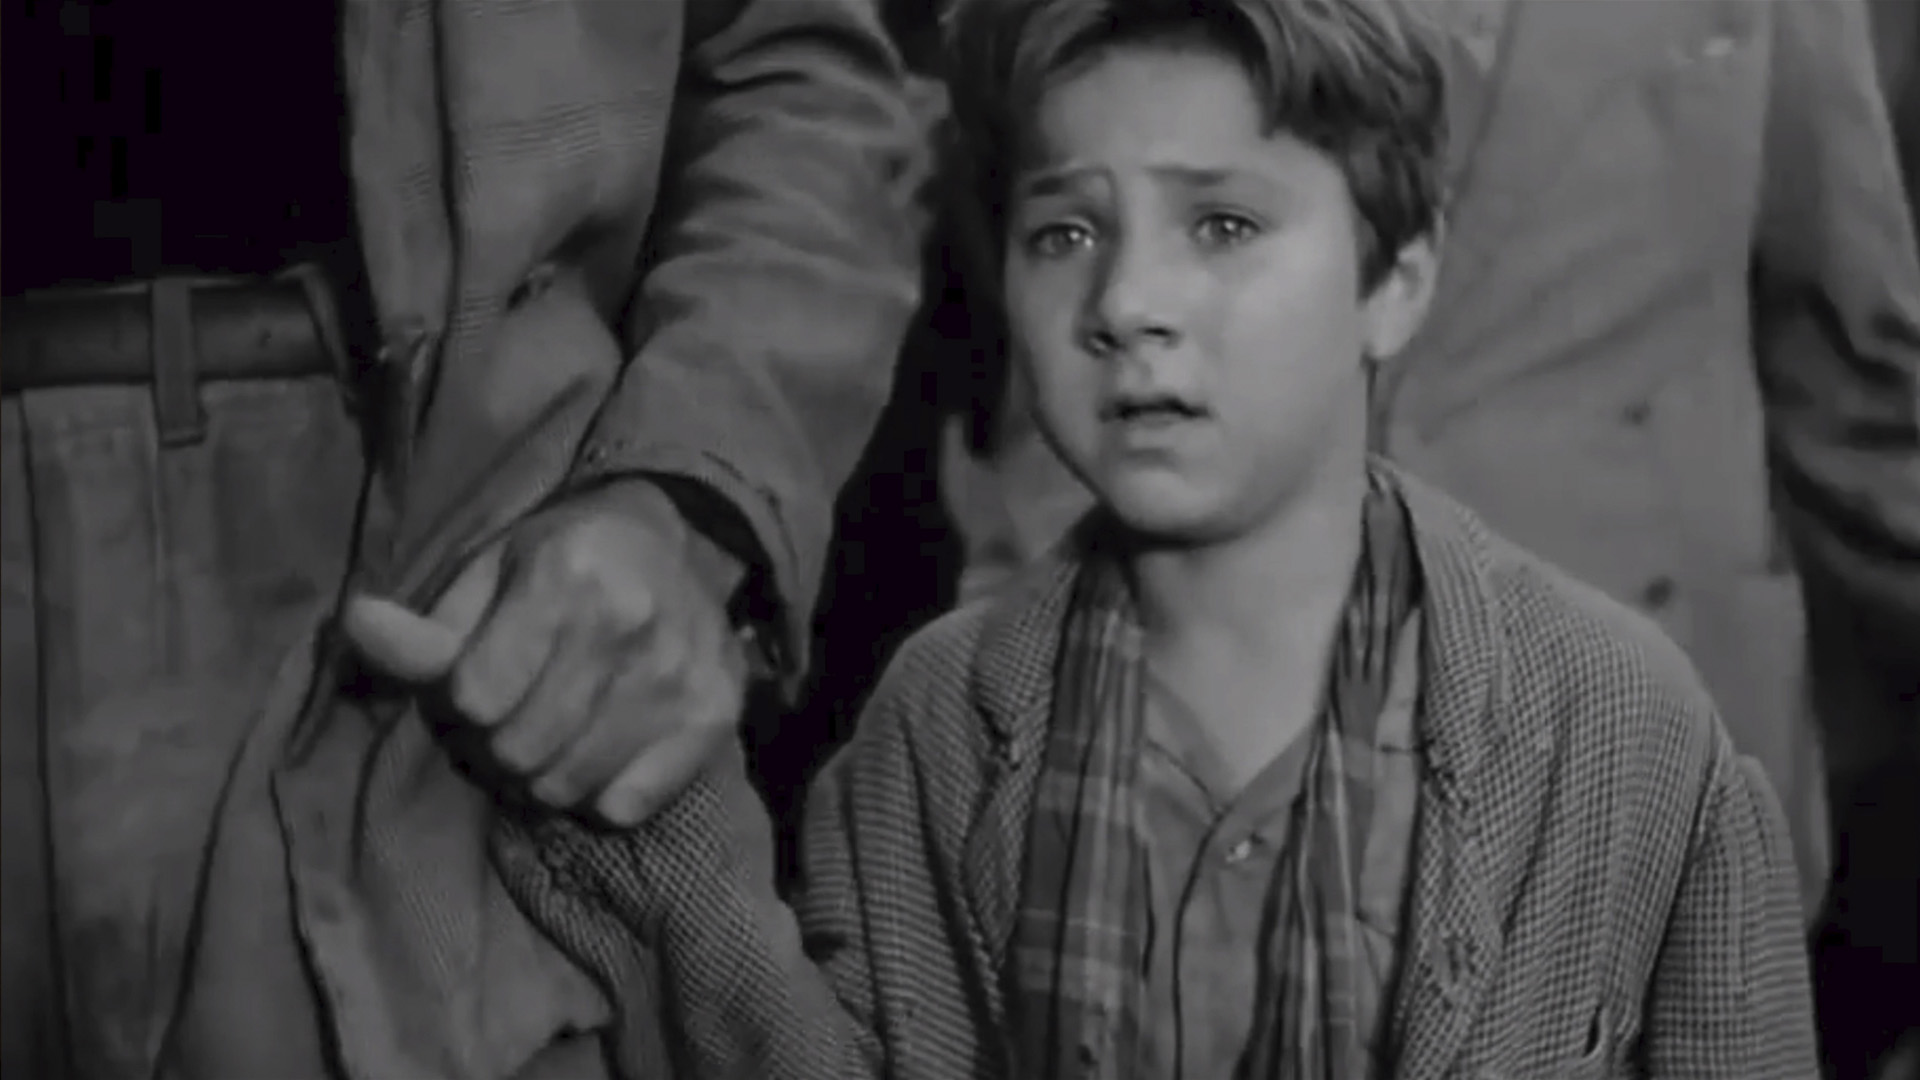 The boy from the film still looks with tears in his eyes at what his father did, holding the hand of someone nearby